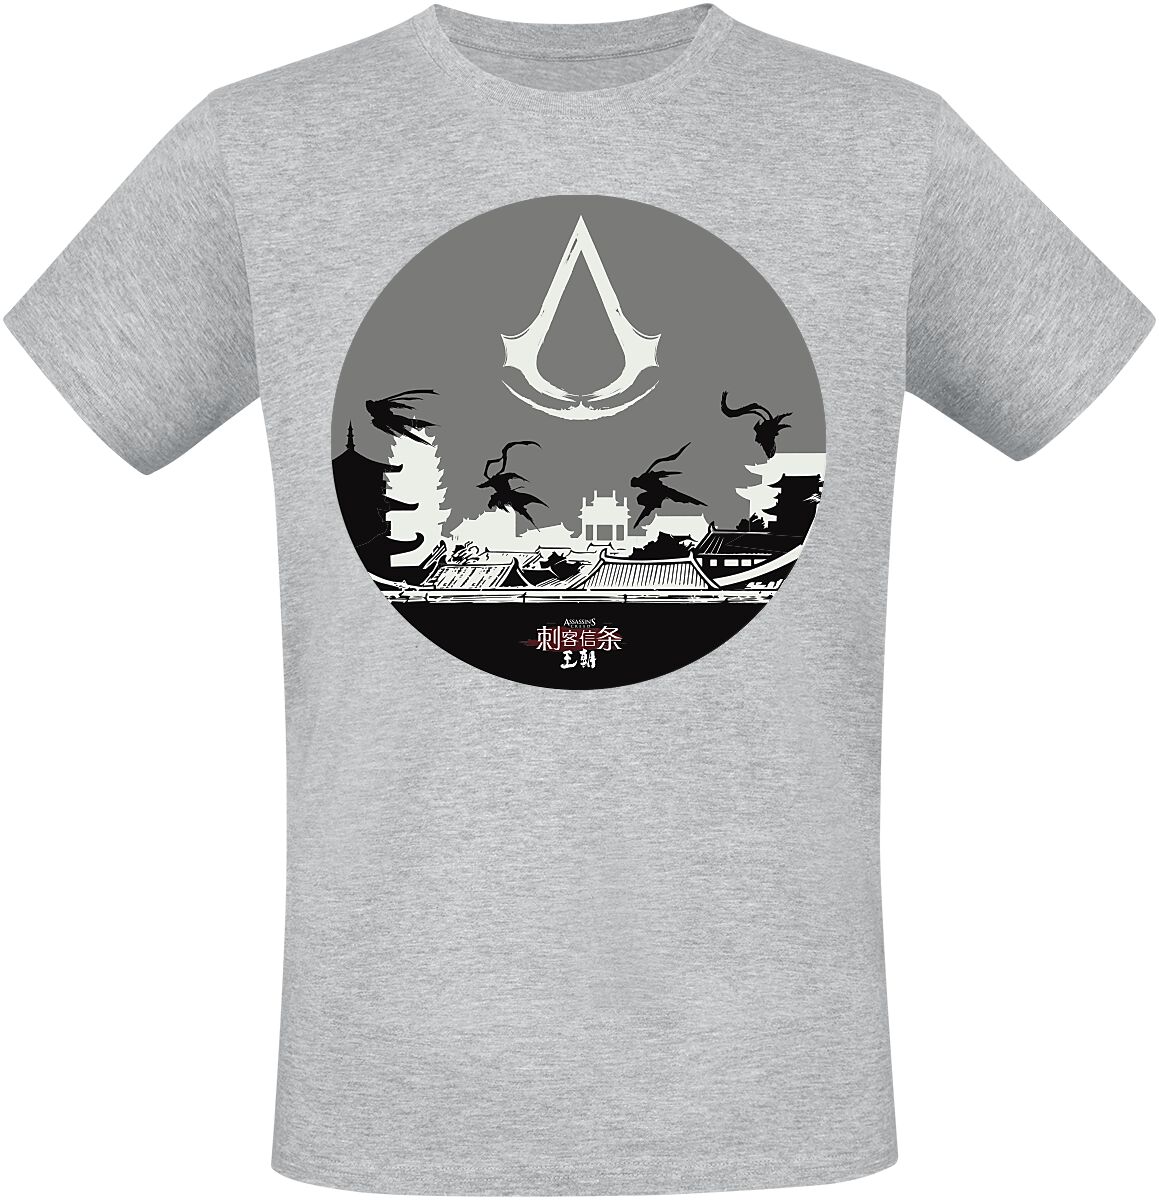 Assassin`s Creed Dynasty - Circle T-Shirt grau meliert in M